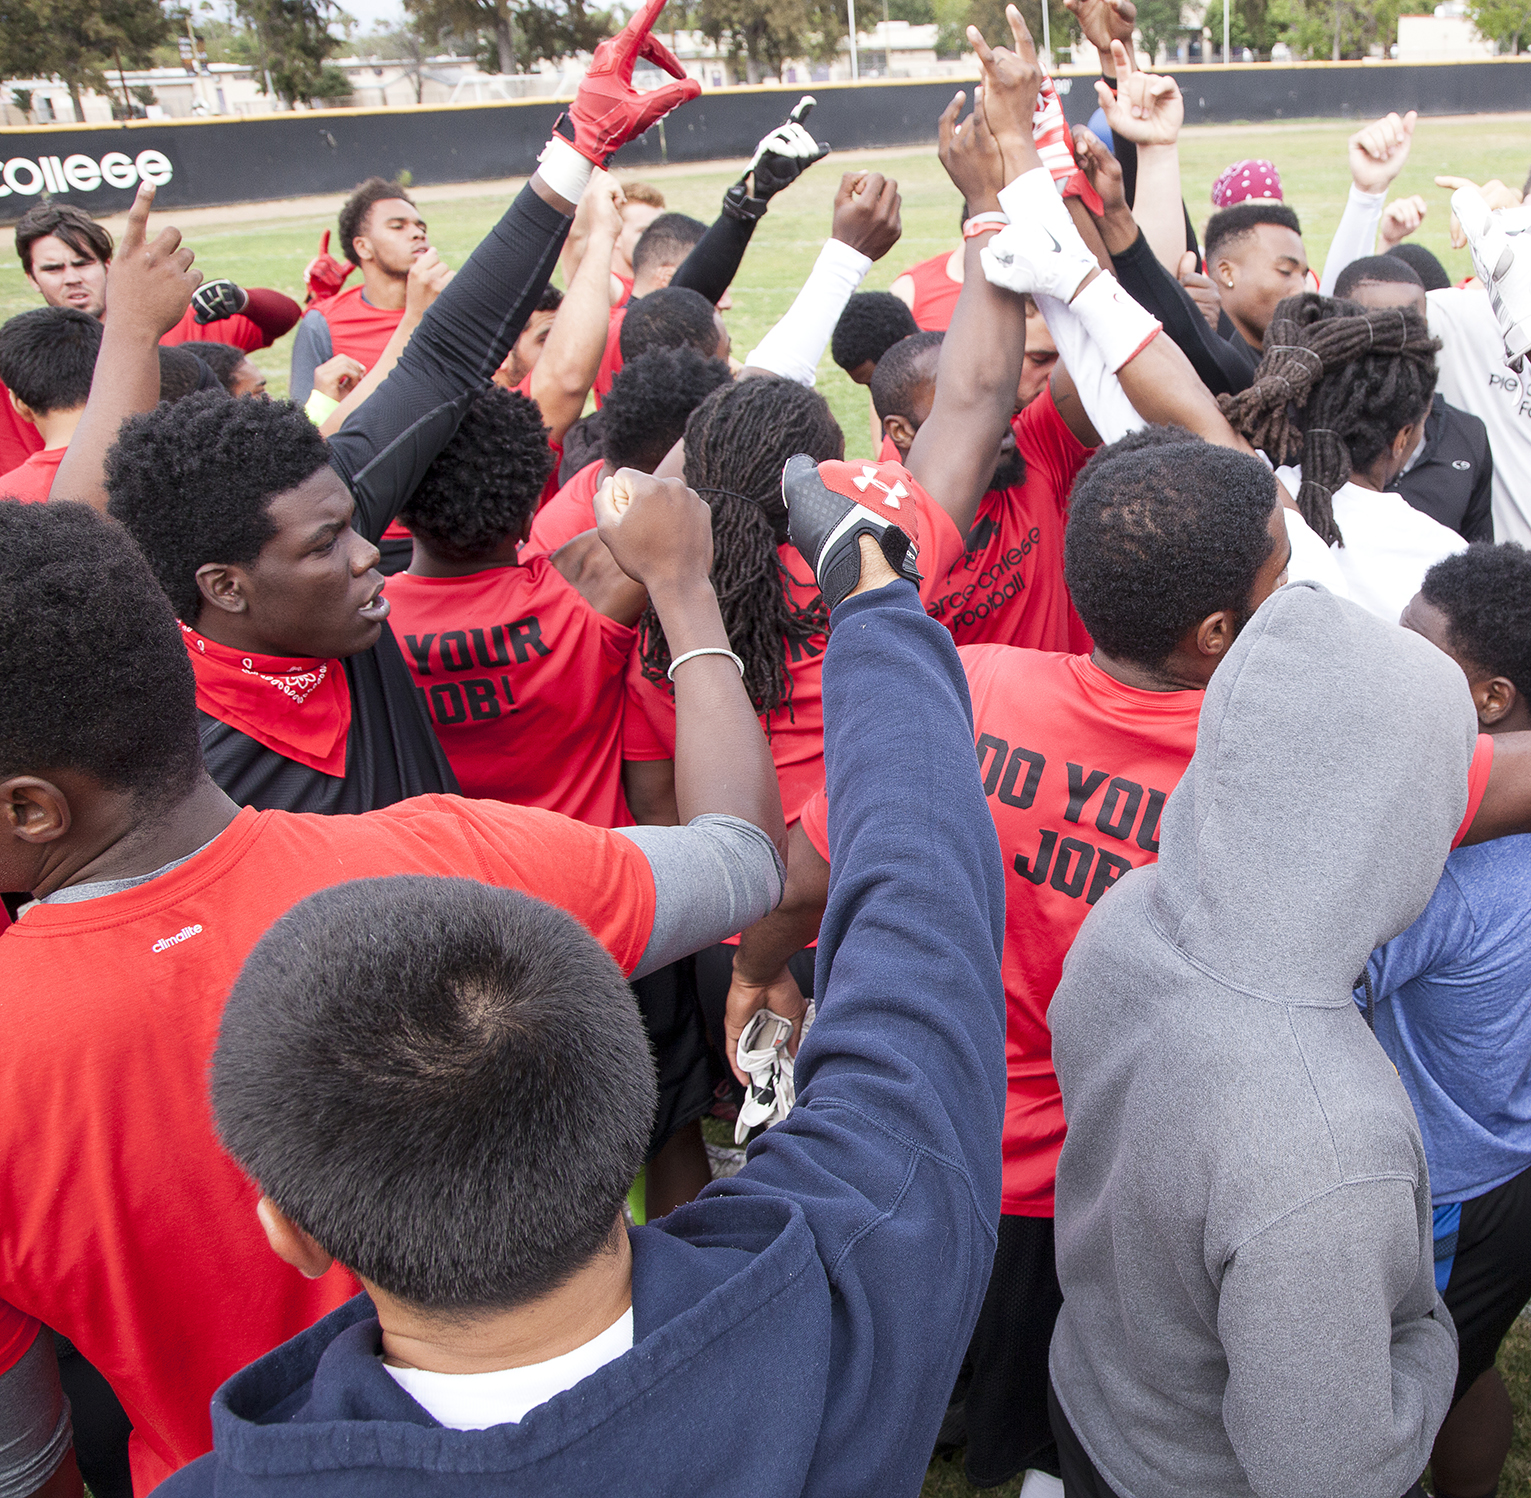  Players on the Pierce College football team gather around in a huddle just before going off to their respective team drills during a spring practice and training session on Thursday, May 14, 2015. Woodland Hills, Calif.&nbsp; 